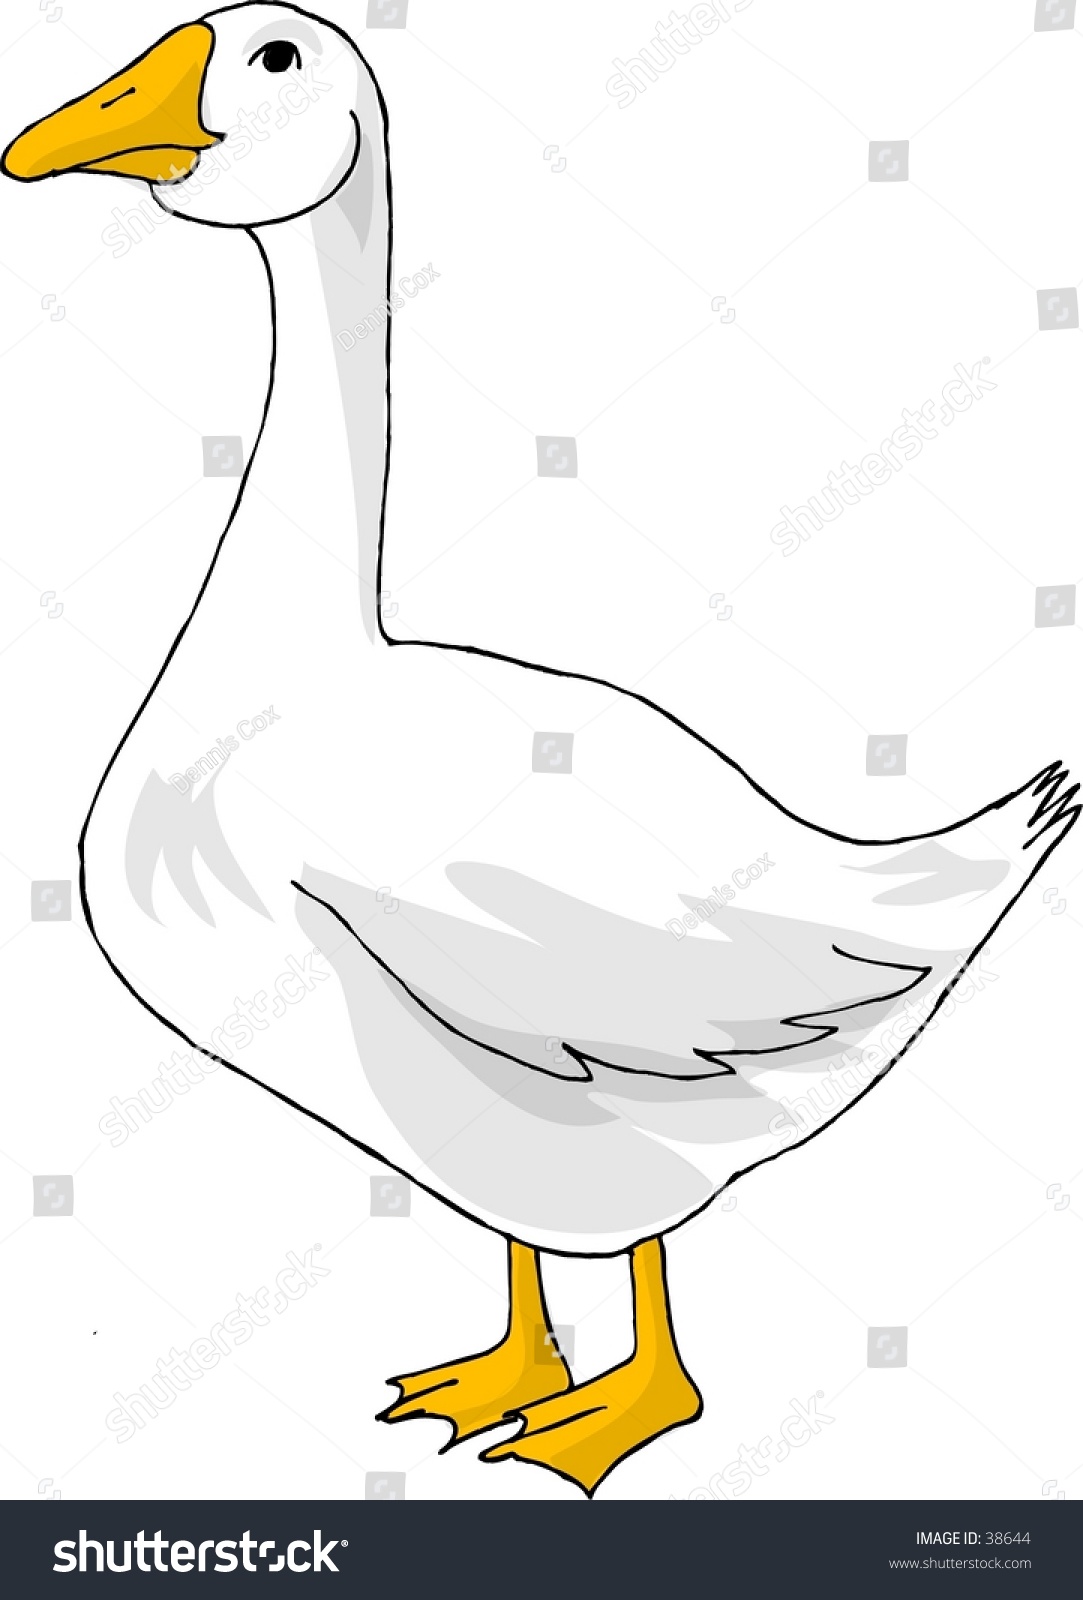 clip art of mother goose - photo #33